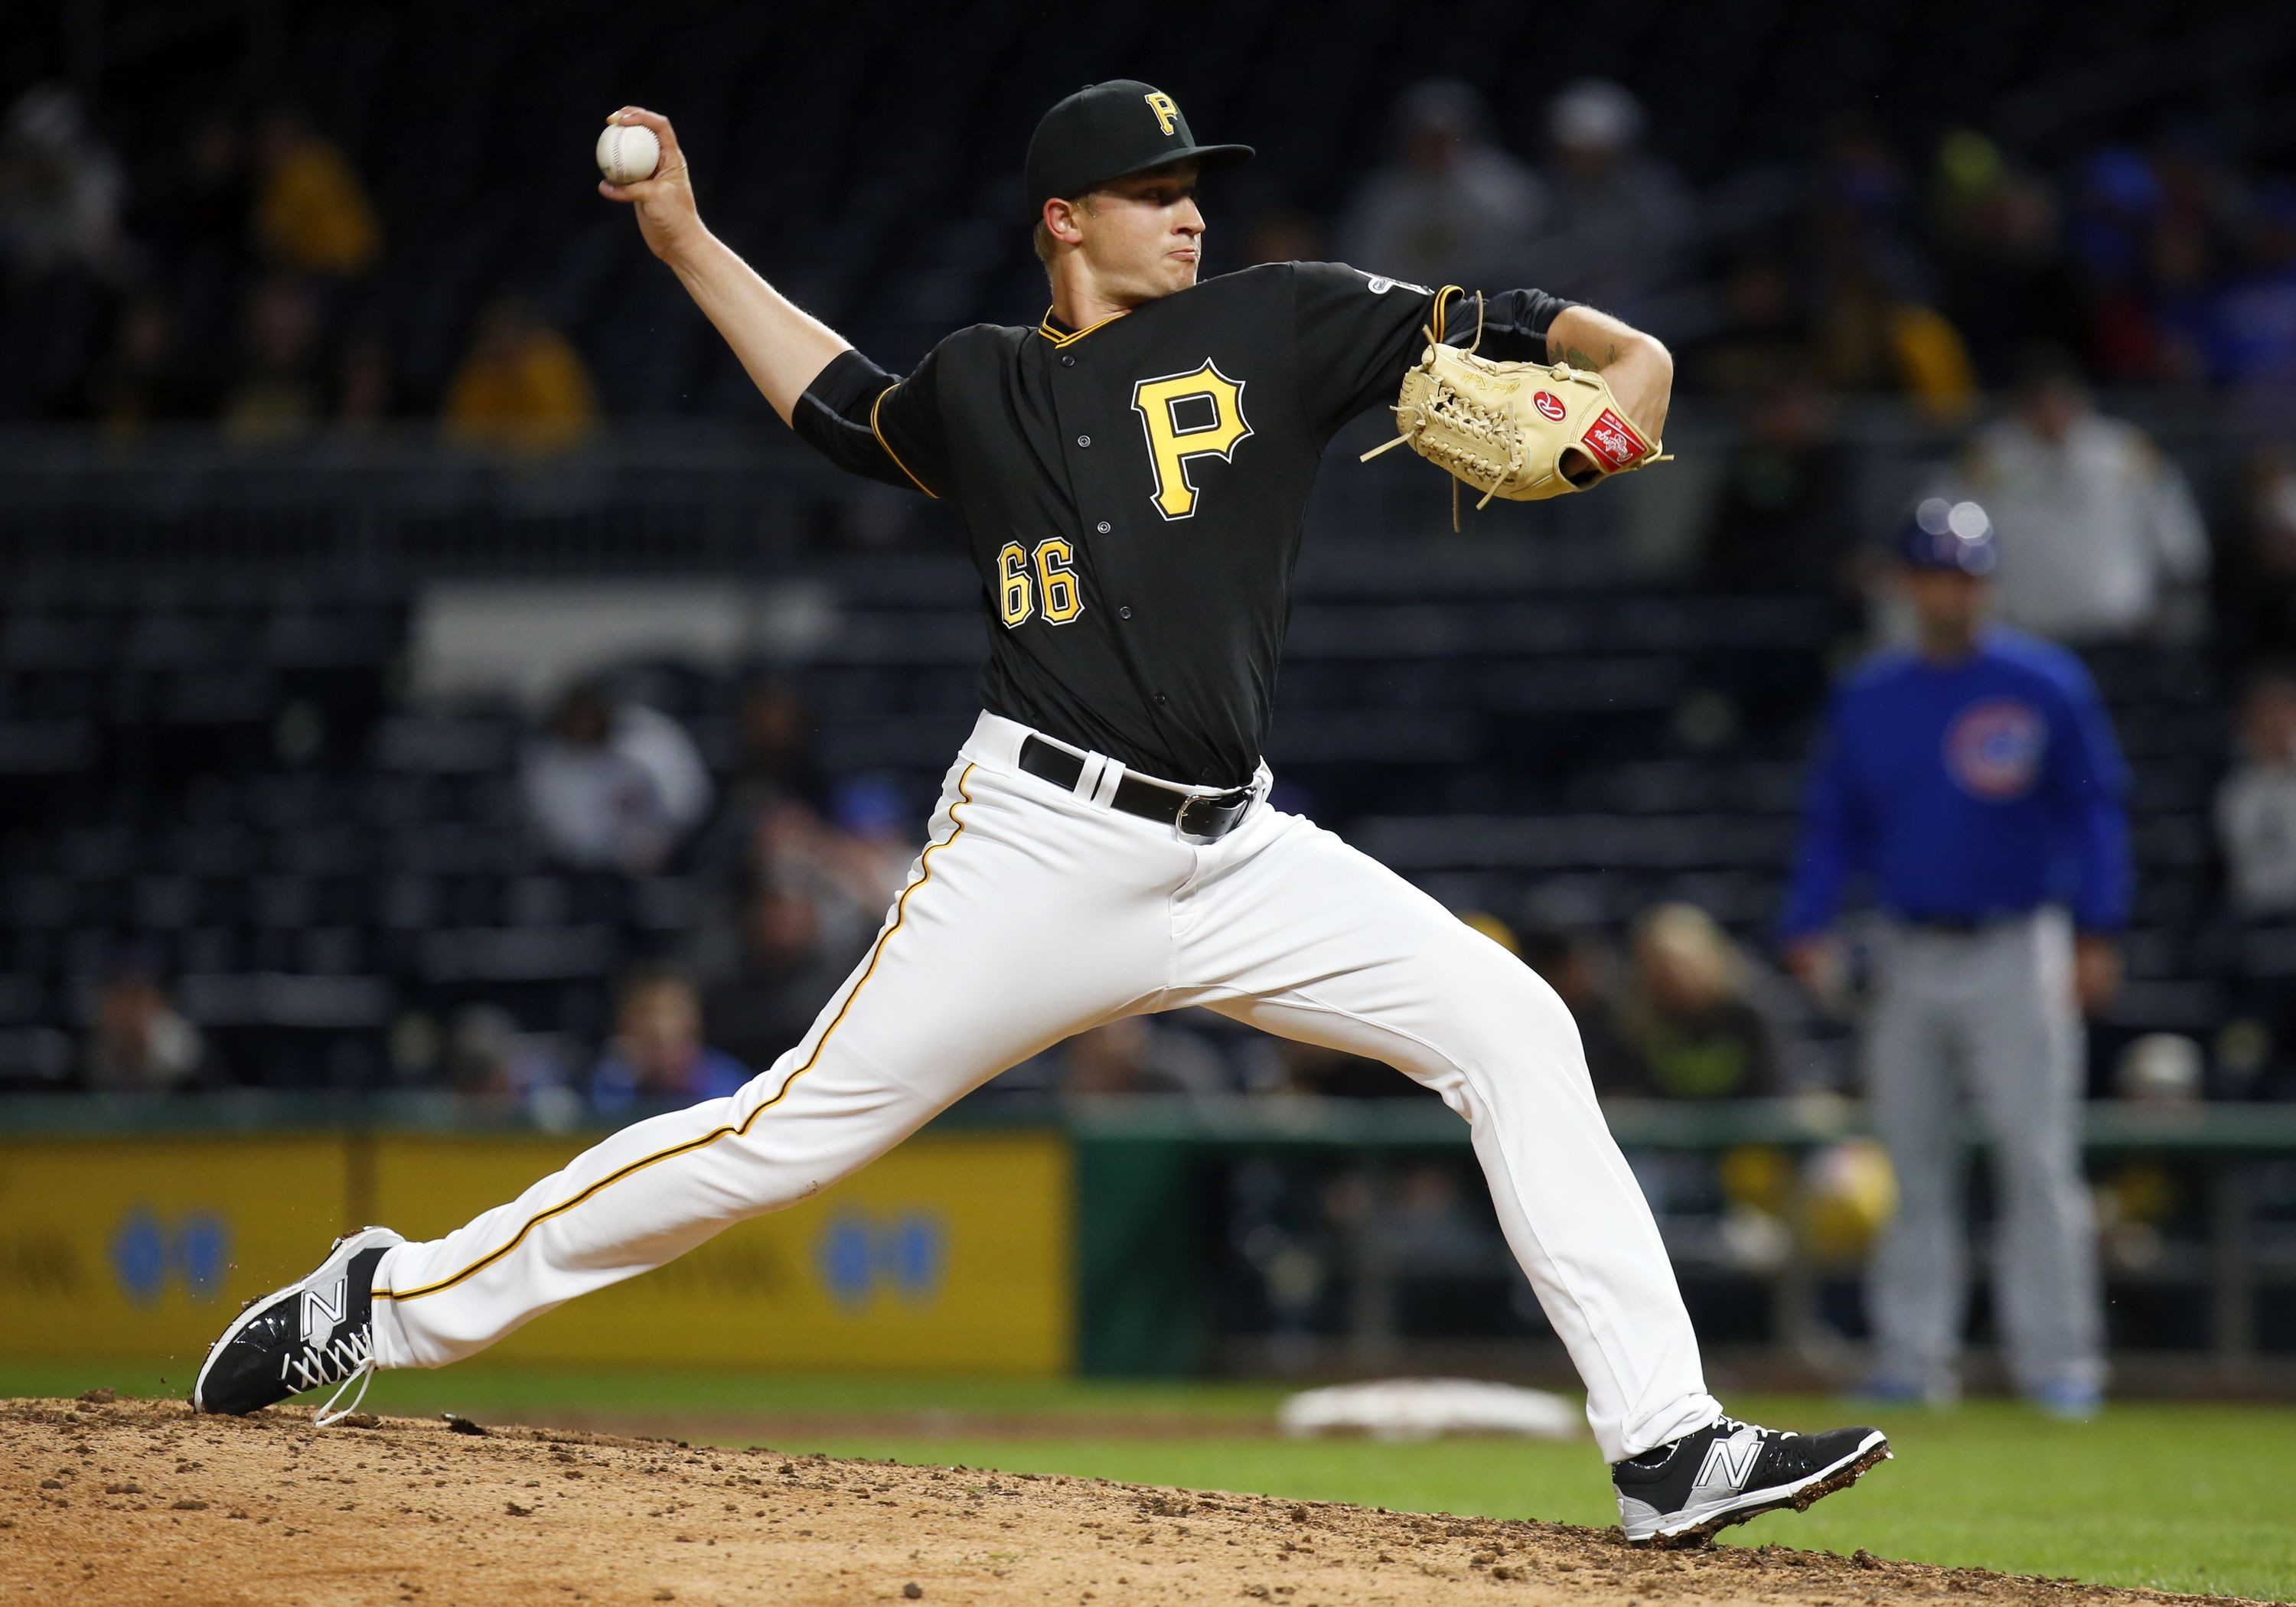 Pittsburgh Pirates FanGraphs Top 25 Ranked Prospects